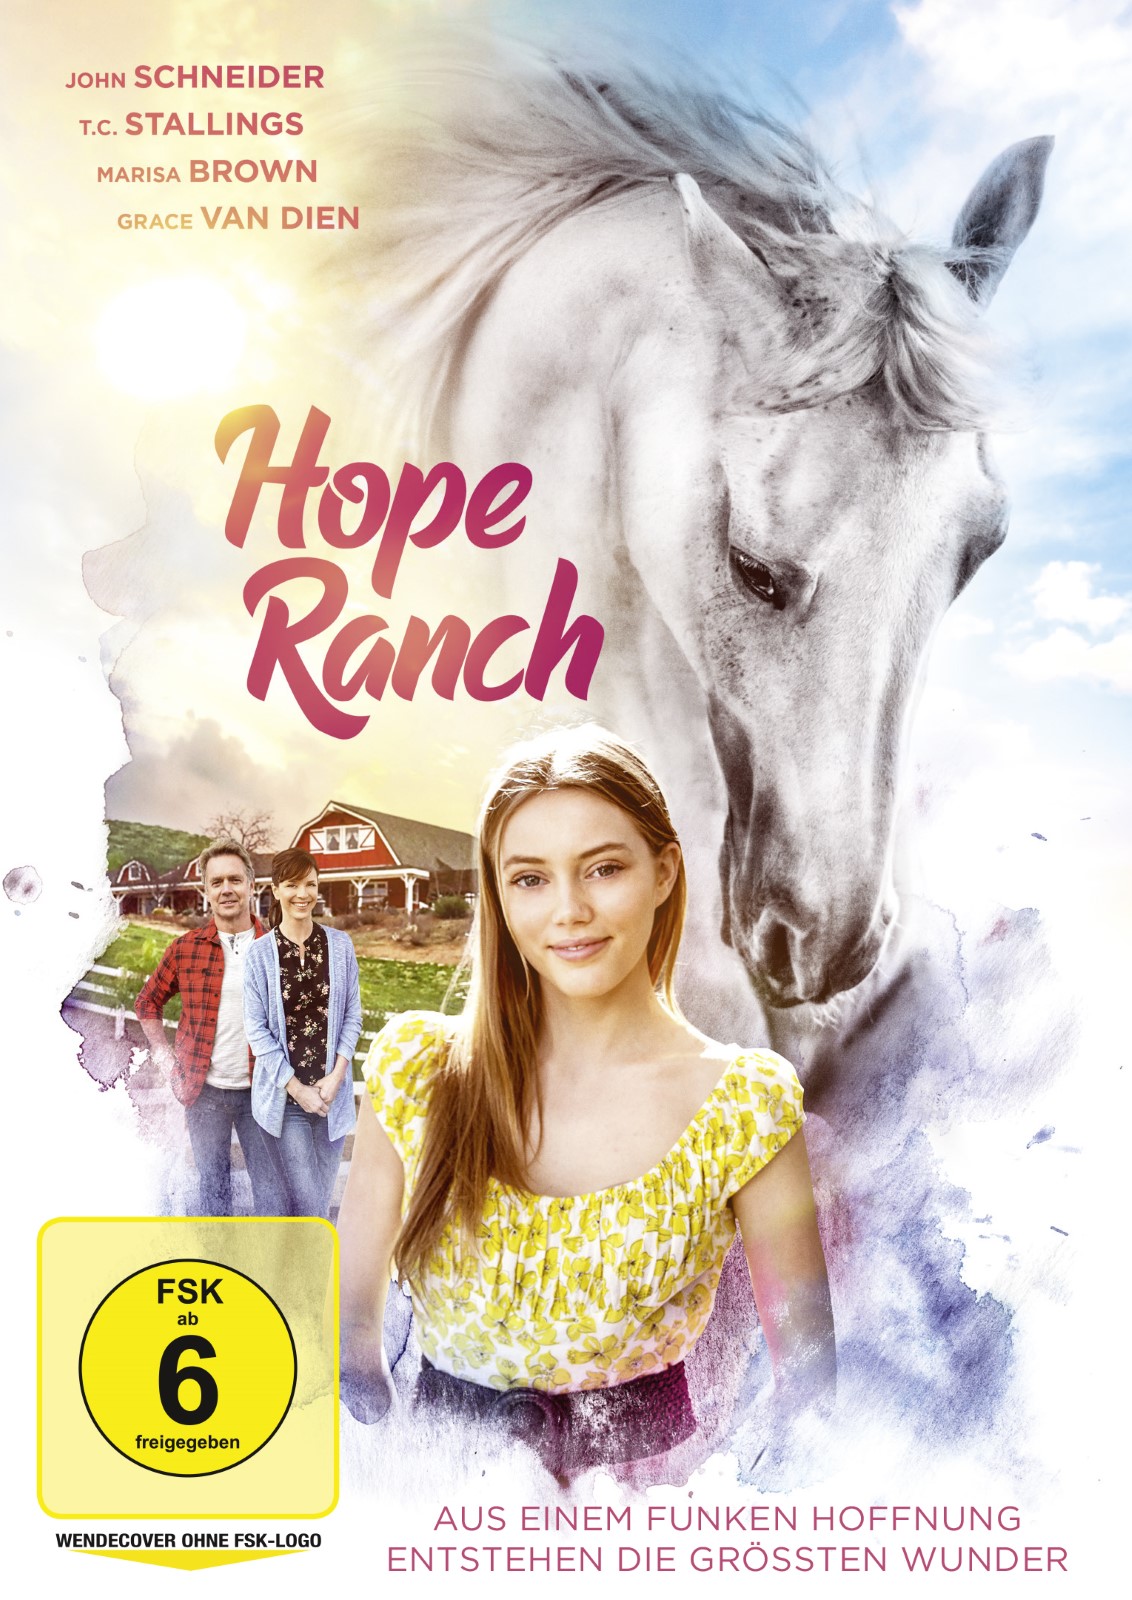 Echoing hope ranch